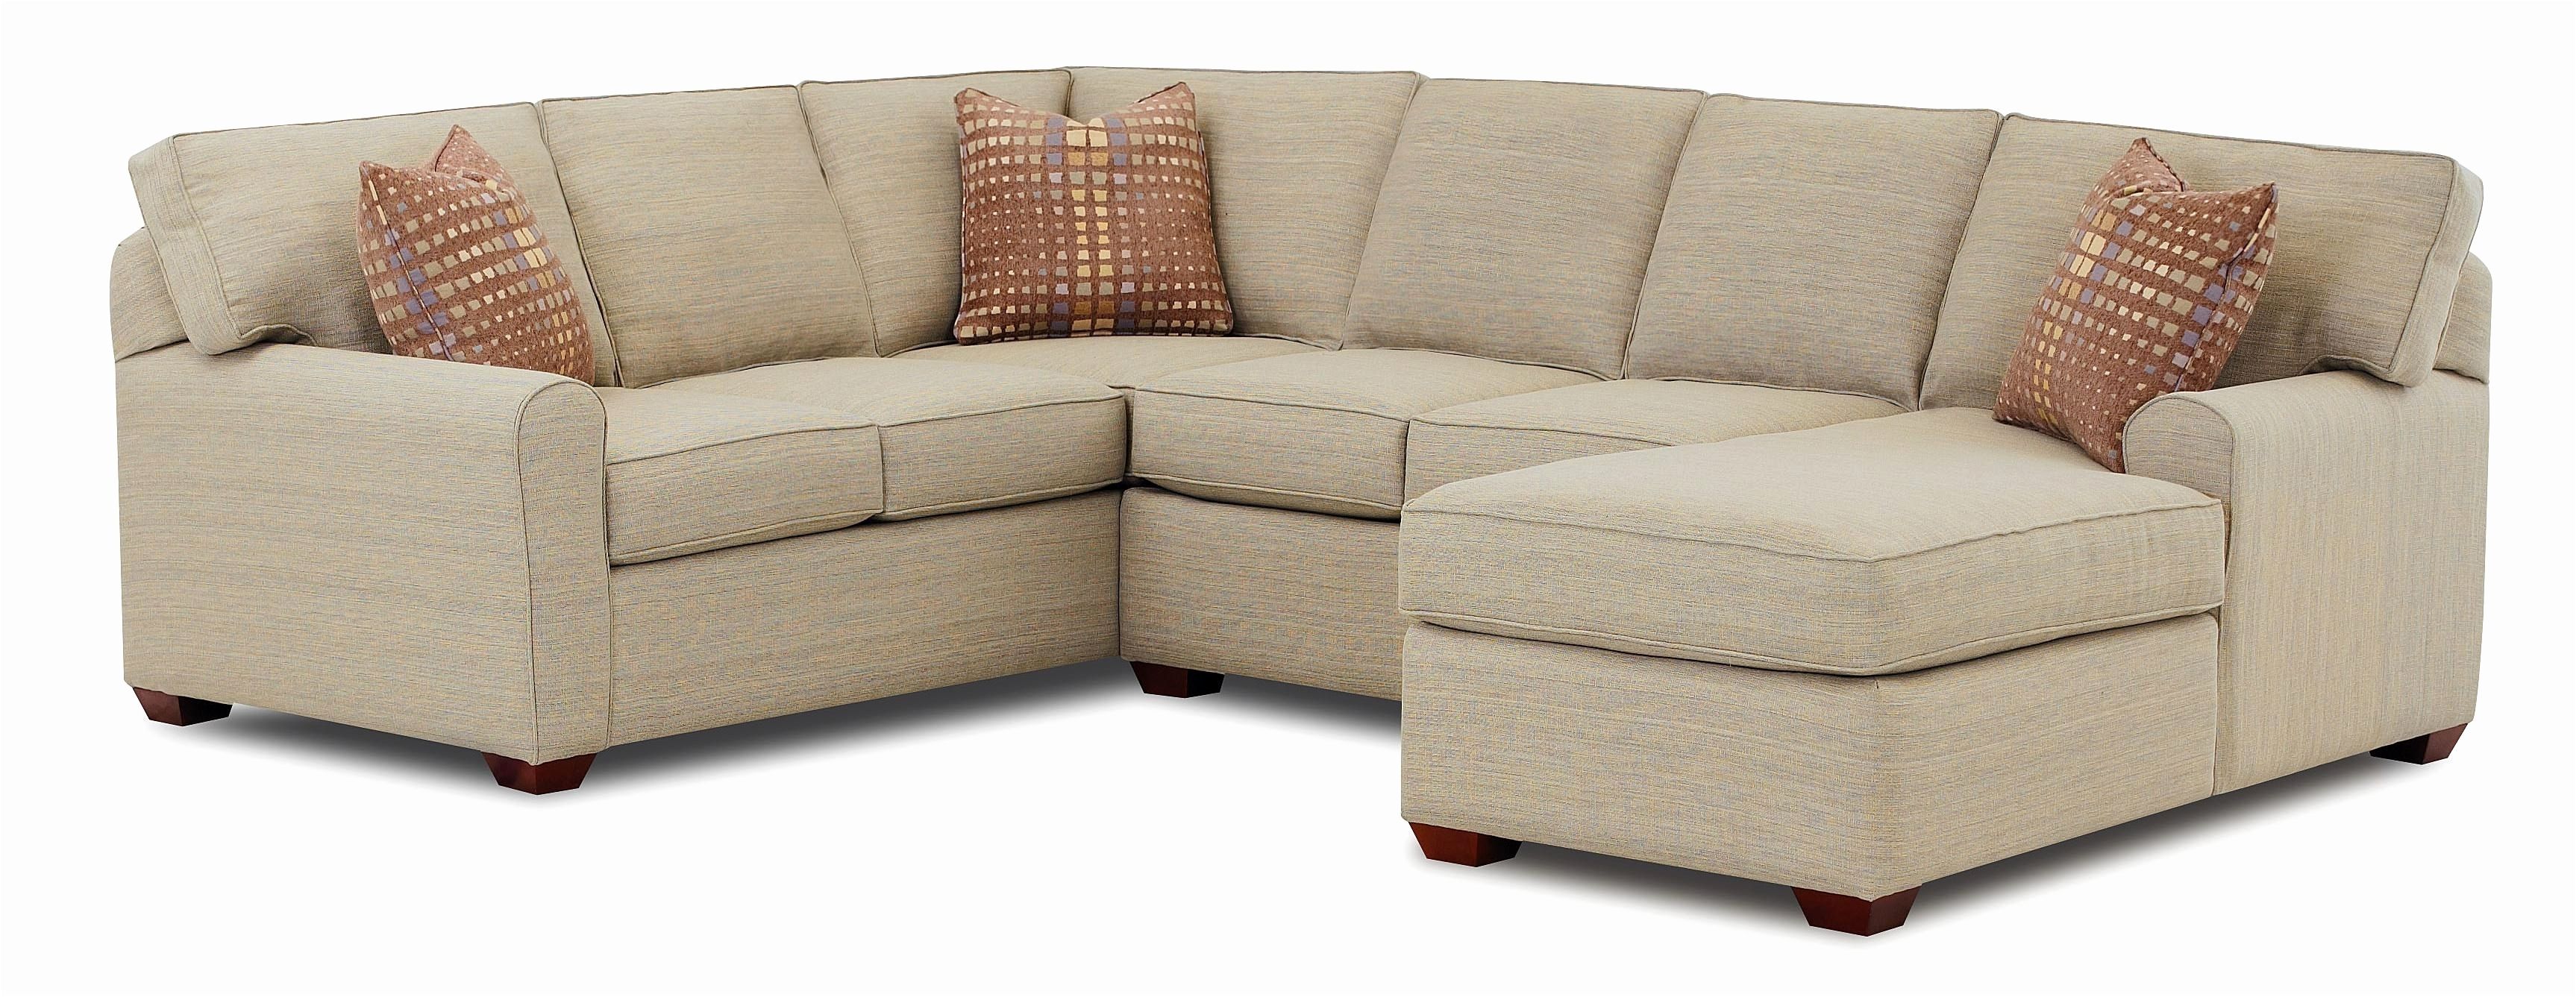 Chaise Sectional Sofas With Regard To Recent Lovely Chaise Sectional Sofa Beautiful – Sofa Furnitures (View 14 of 15)